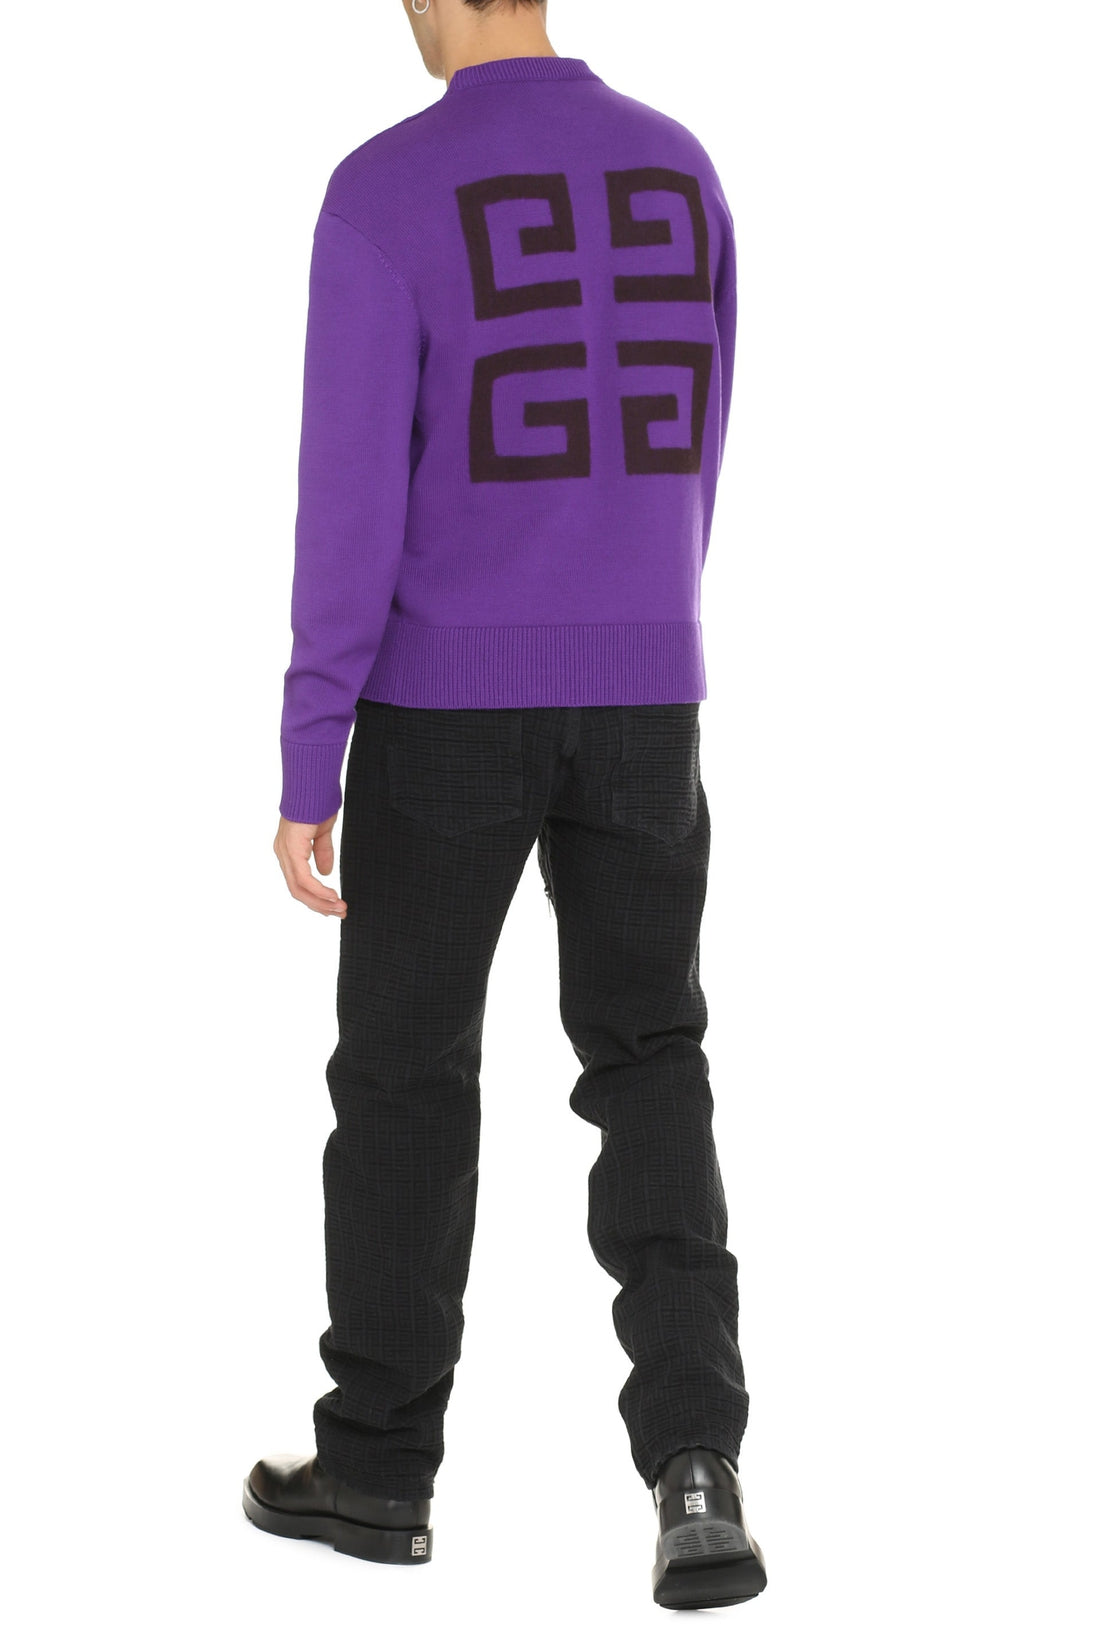 Givenchy-OUTLET-SALE-Wool pullover-ARCHIVIST